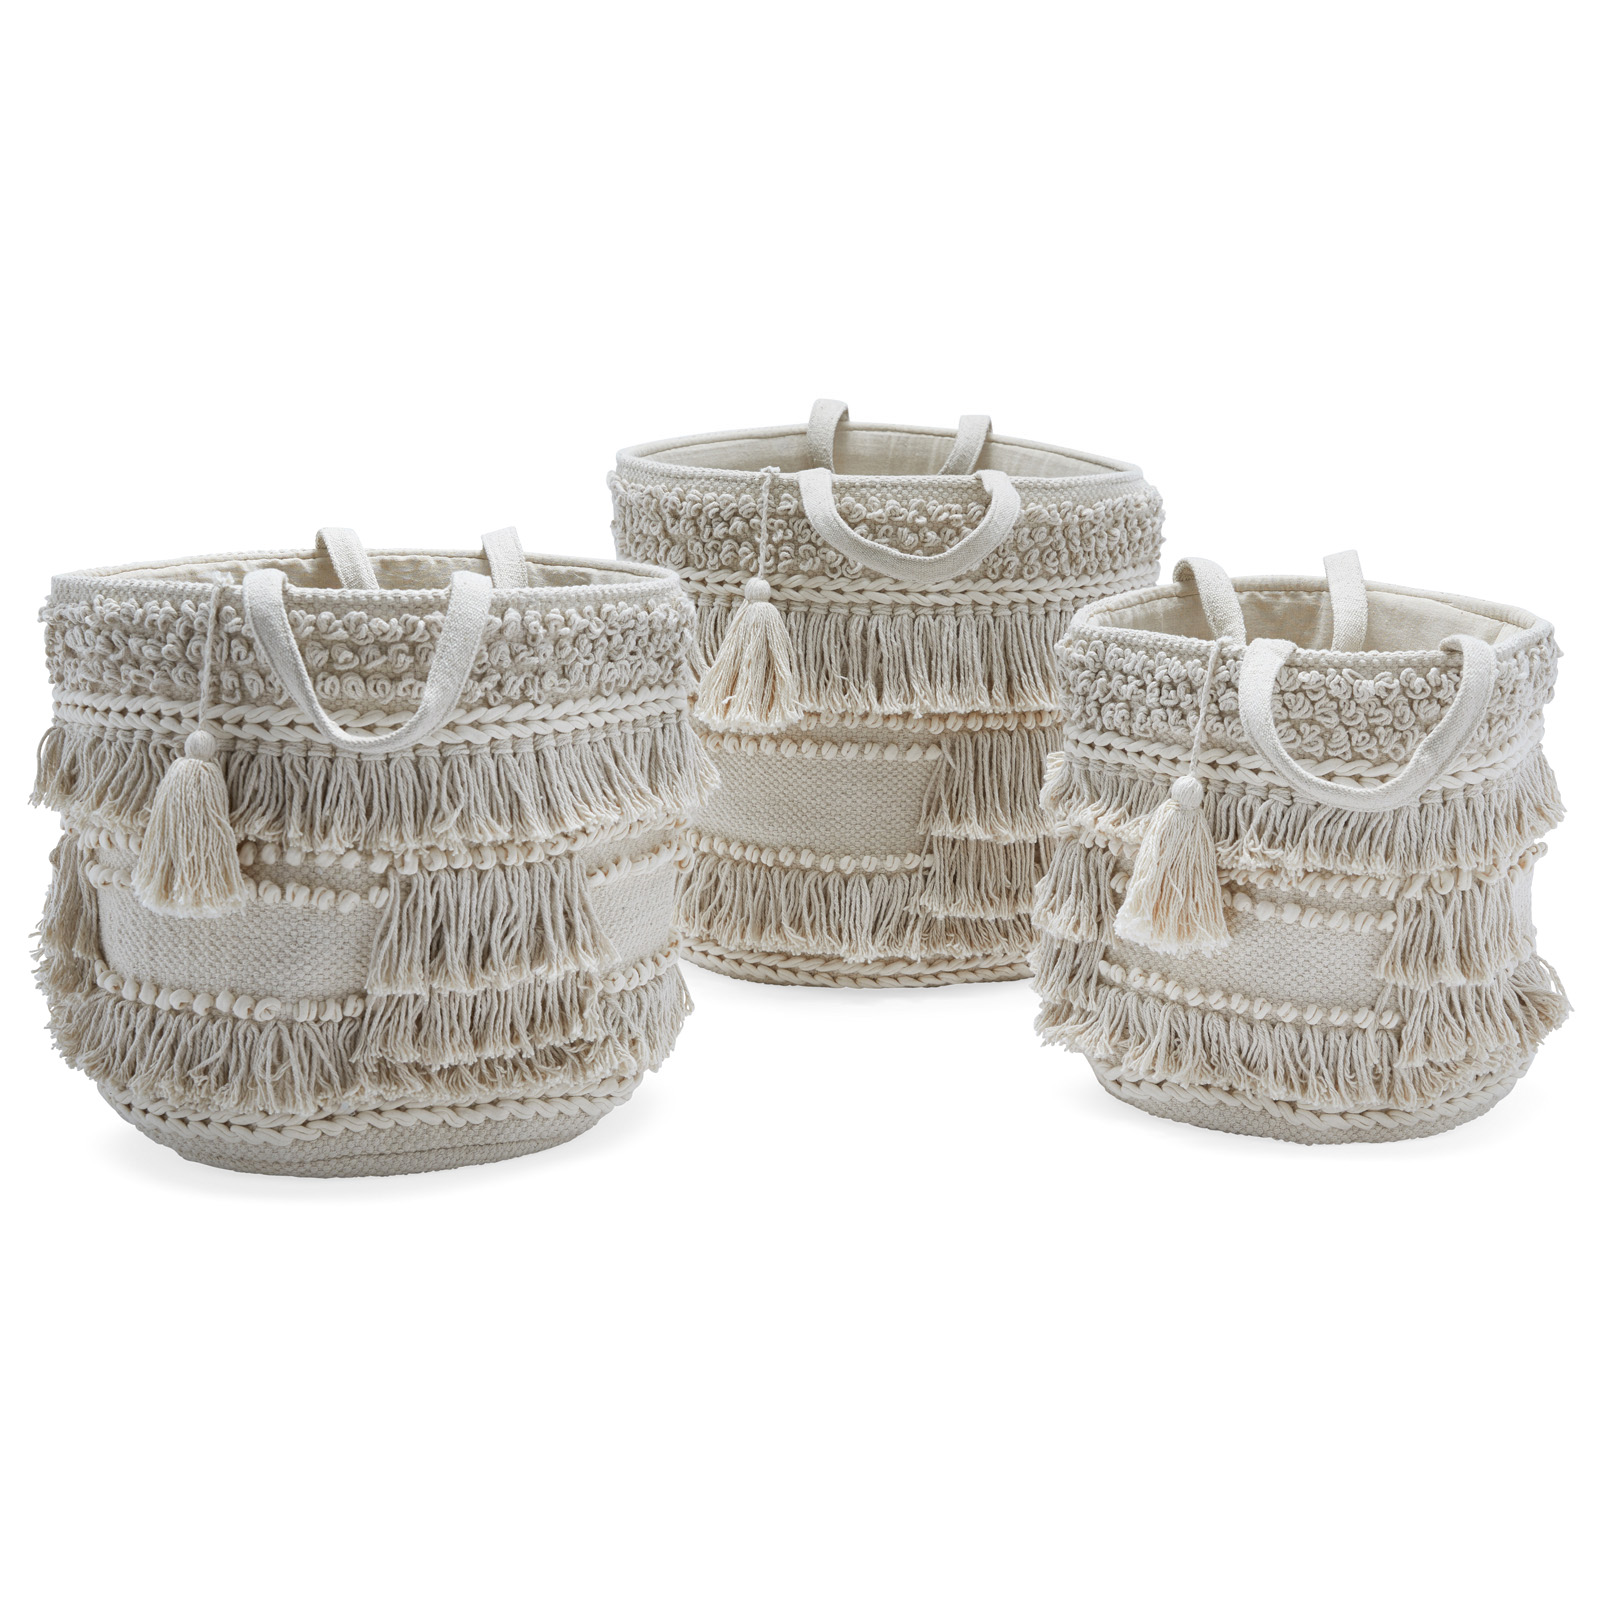 Hand Woven Macrame 3 Piece Basket Set, Natural by Drew Barrymore Flower Home - image 1 of 8